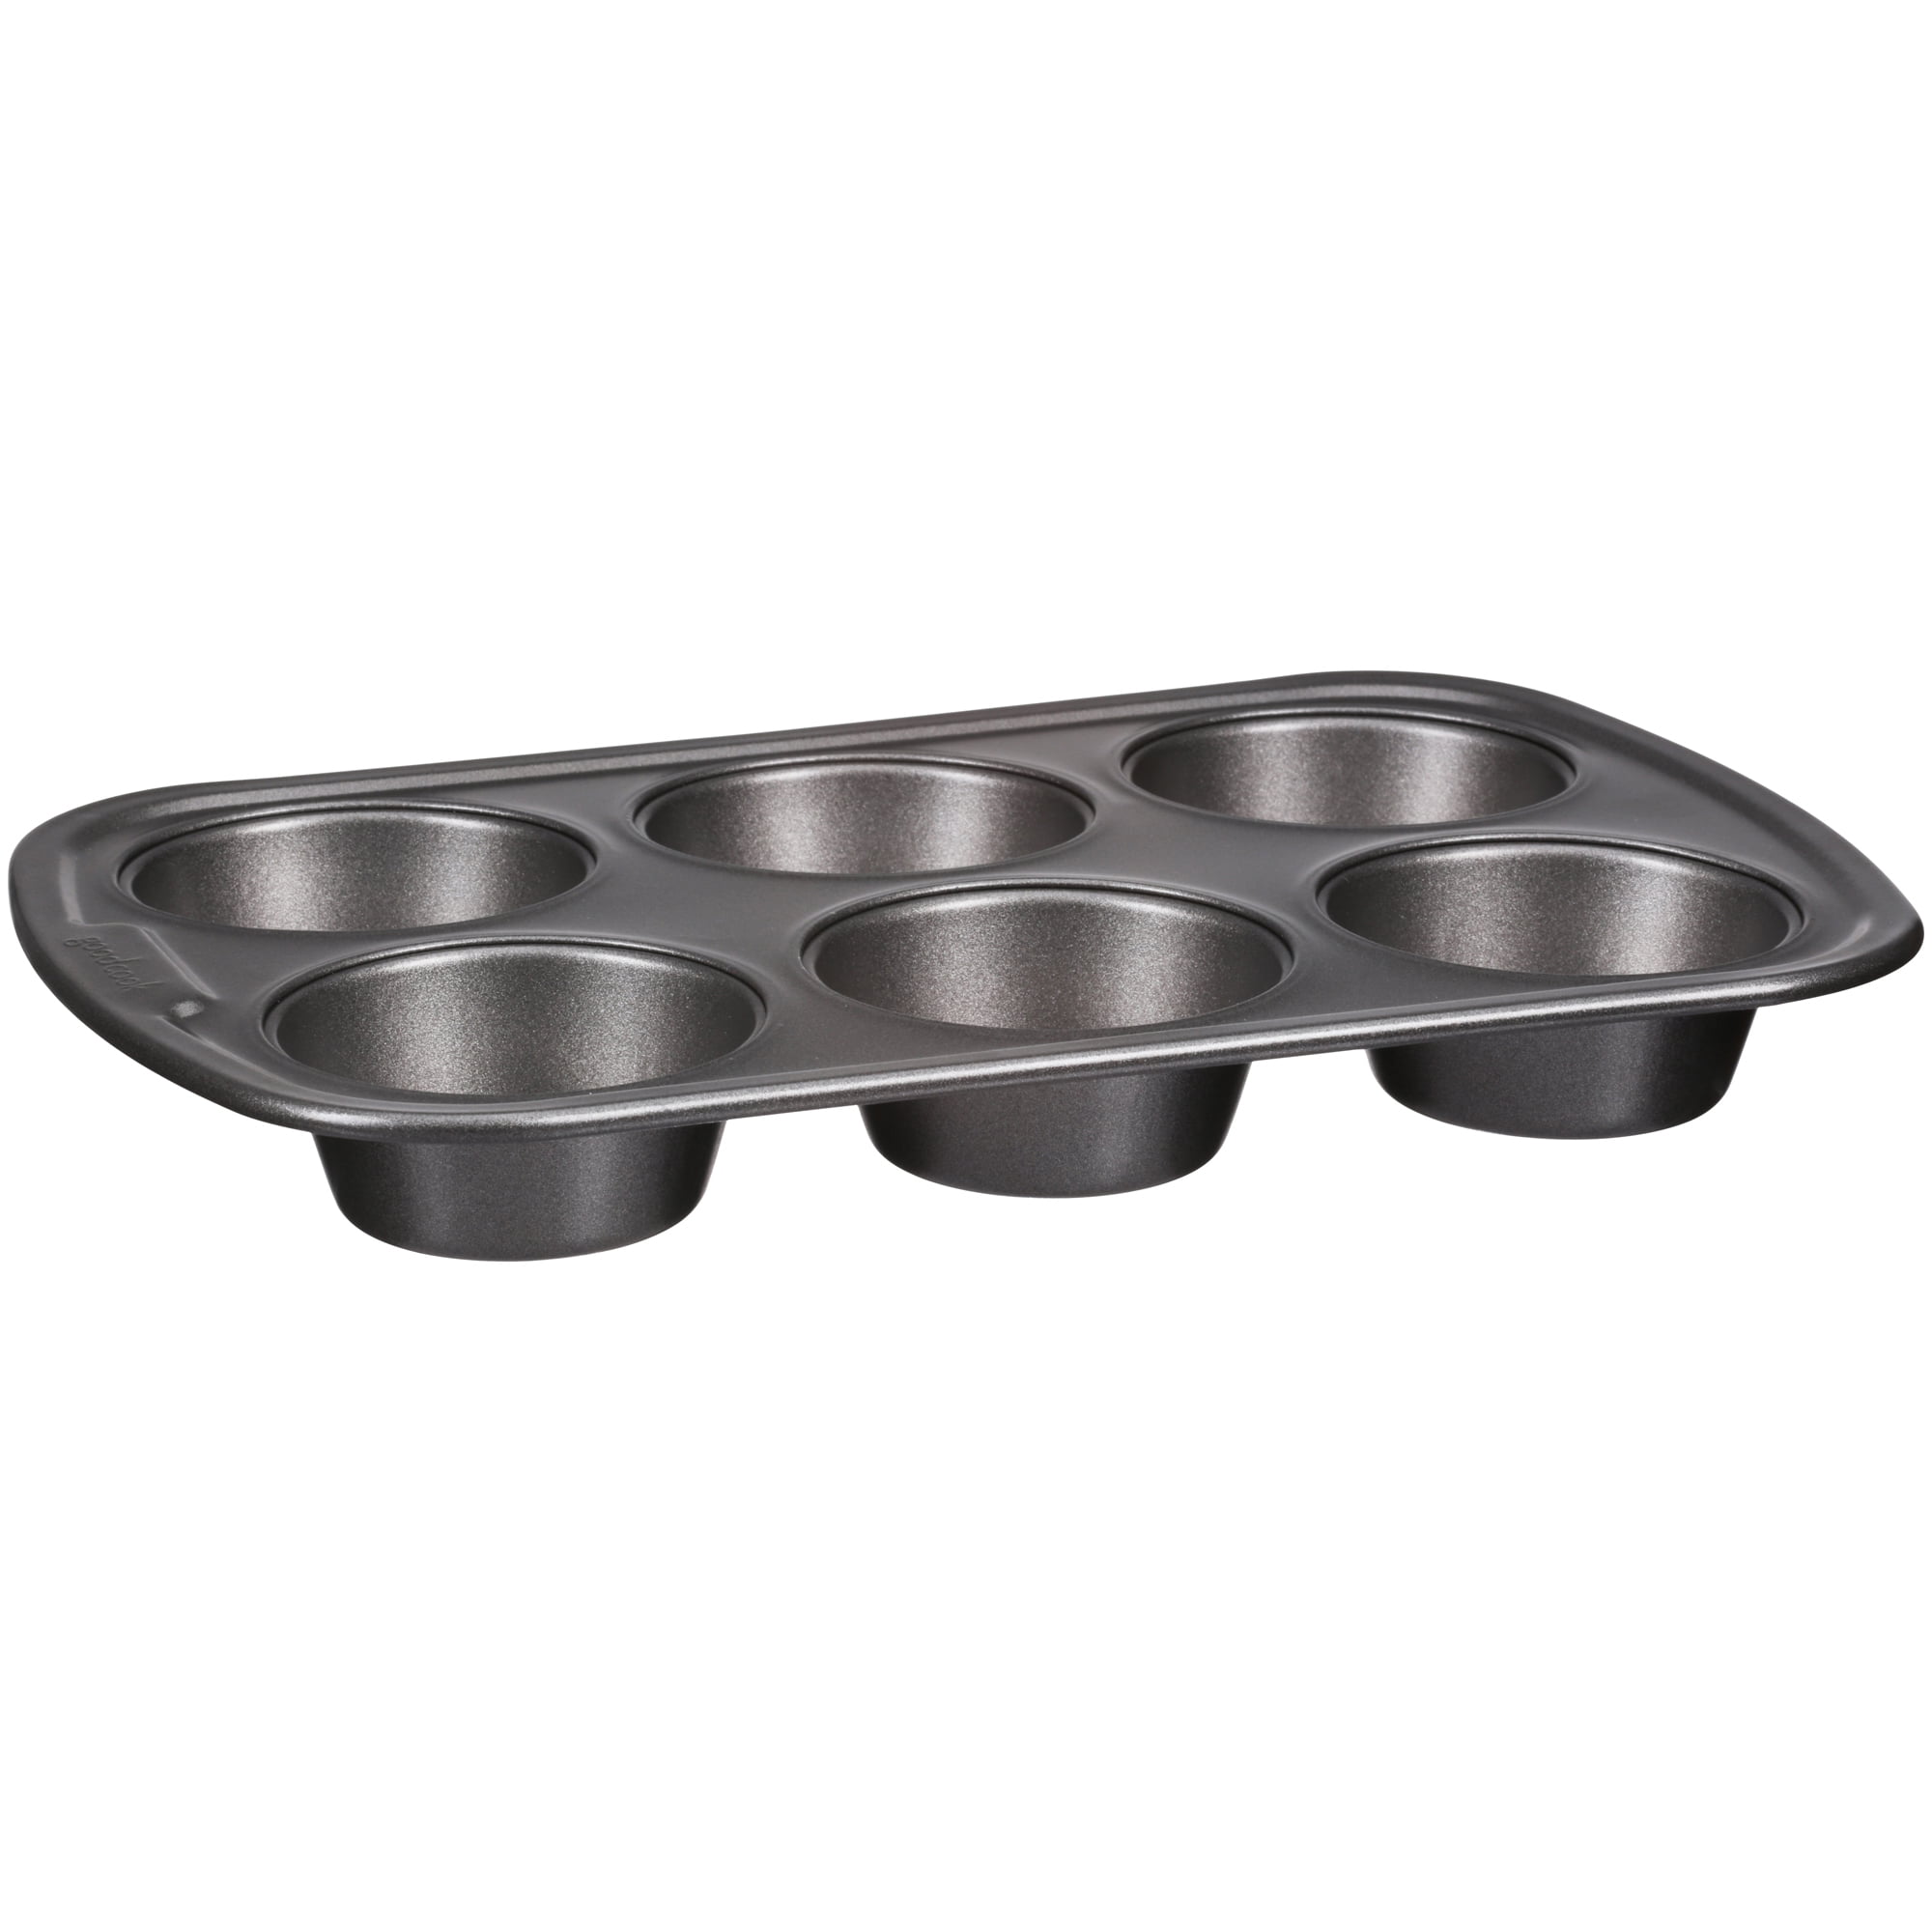 E-far Stainless Steel Muffin Pan, 6-Cup Cupcake Pan Tin for Baking, Metal  Muffin Pan Tray Mold, Non-toxic & Healthy, Oven & Dishwasher Safe, Regular